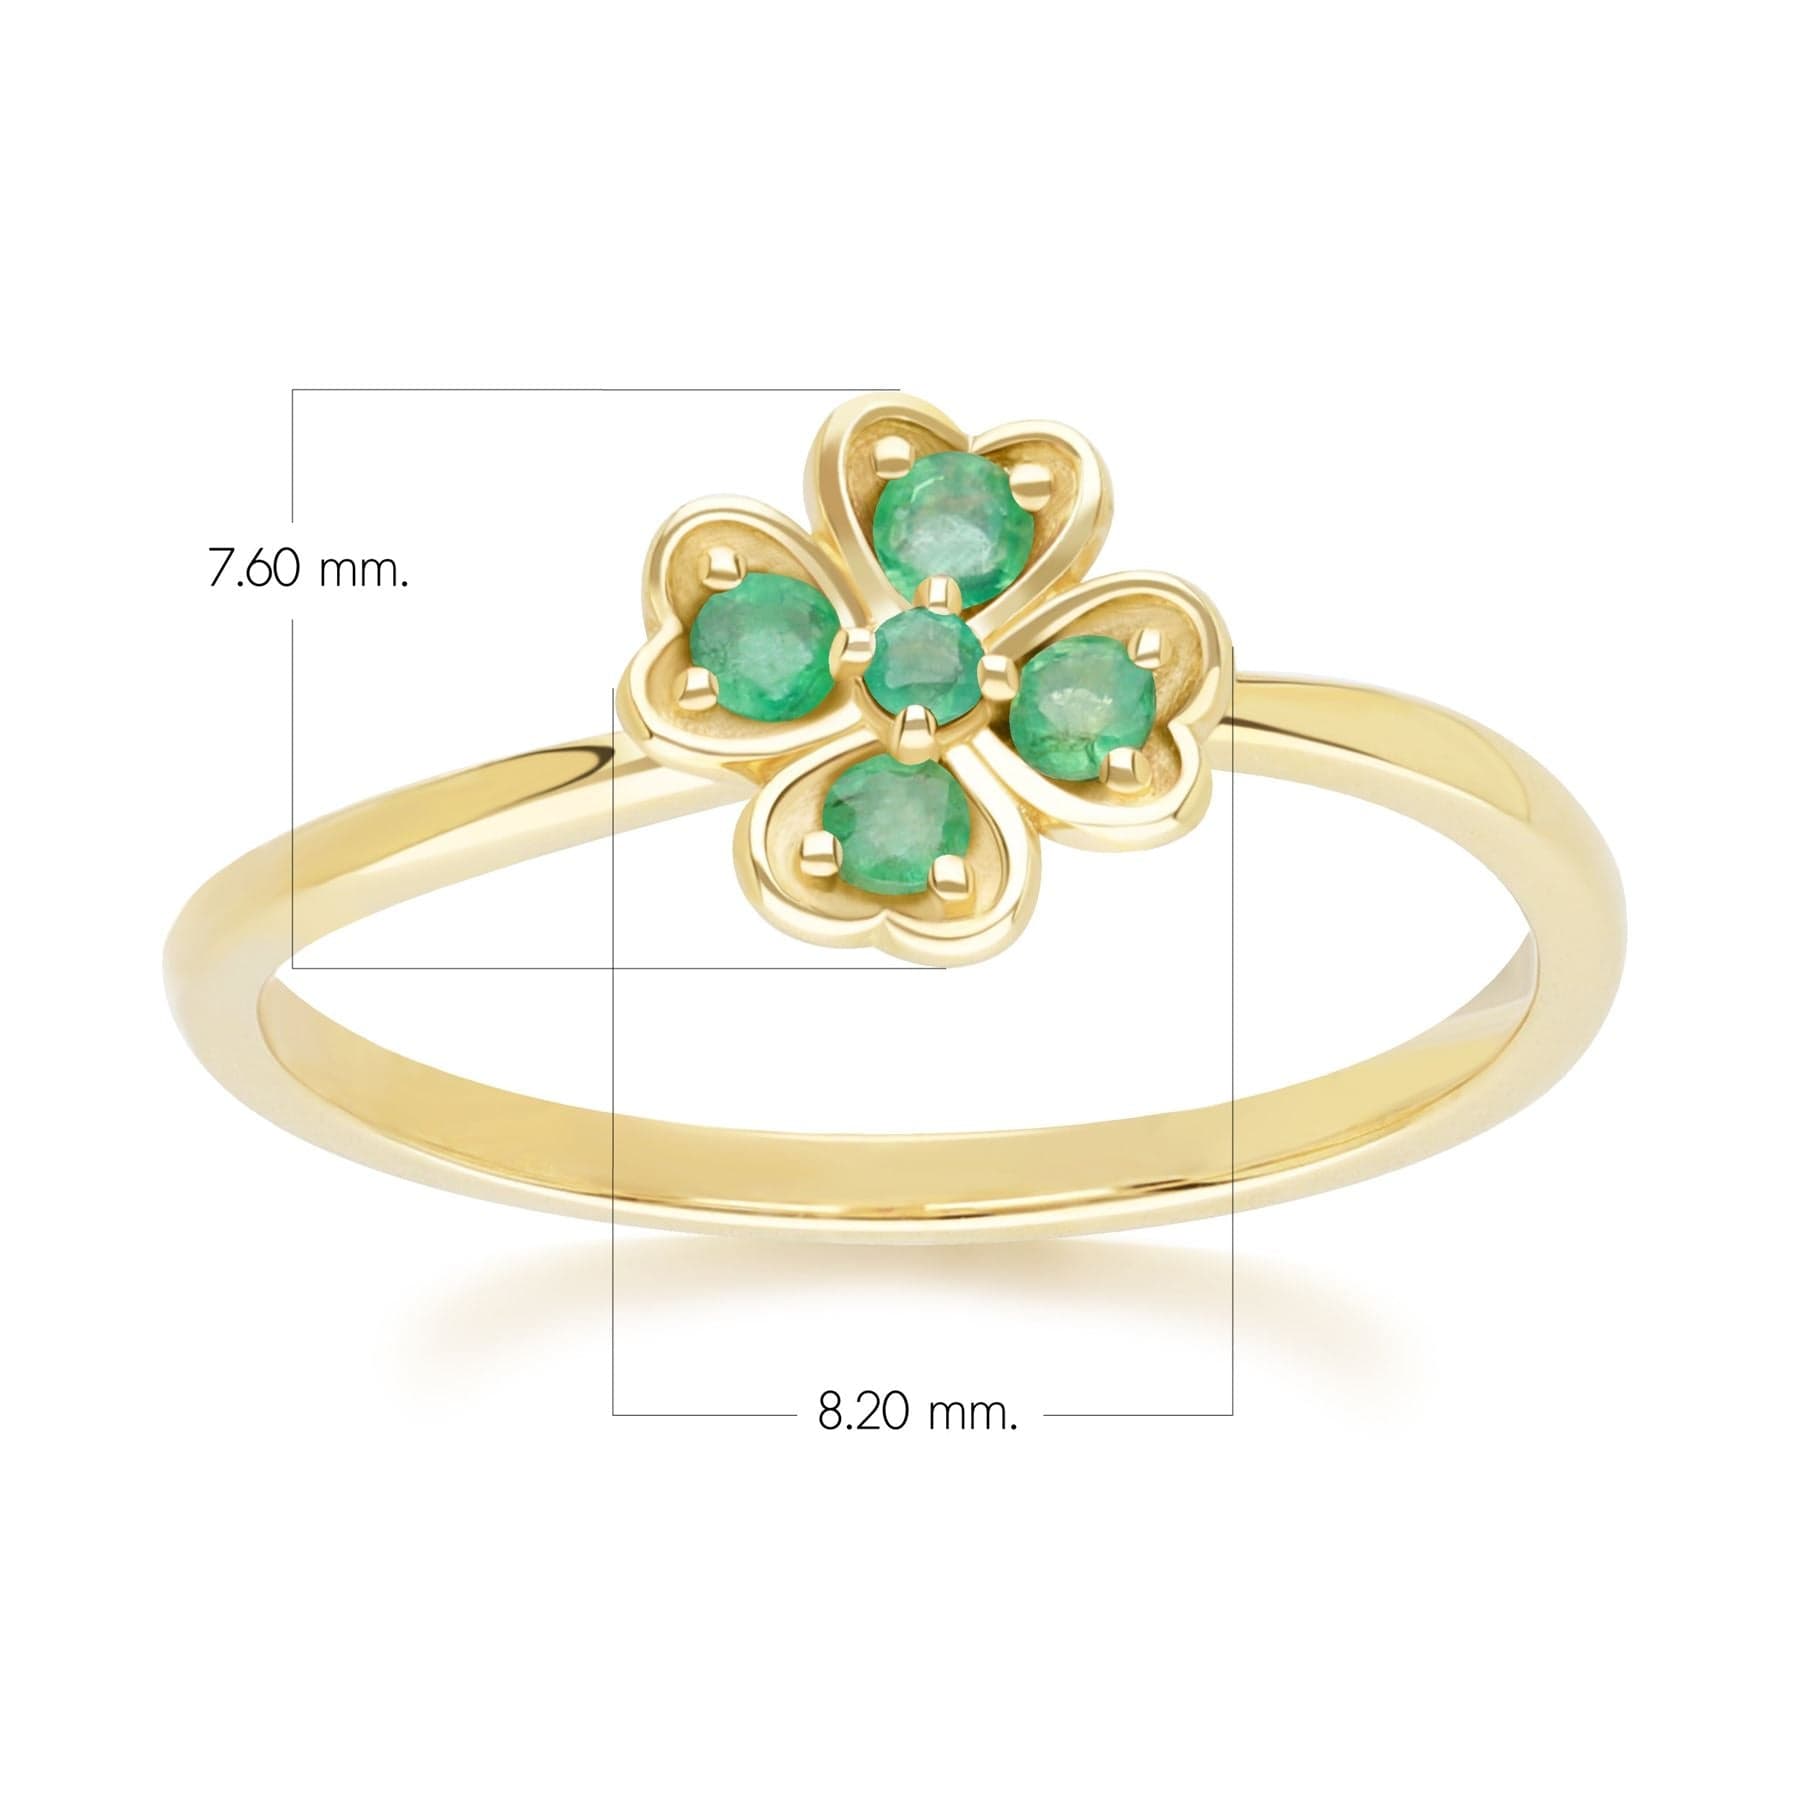 135R2102029 Gardenia Round Emerald Clover Ring in 9ct Yellow Gold Dimensions